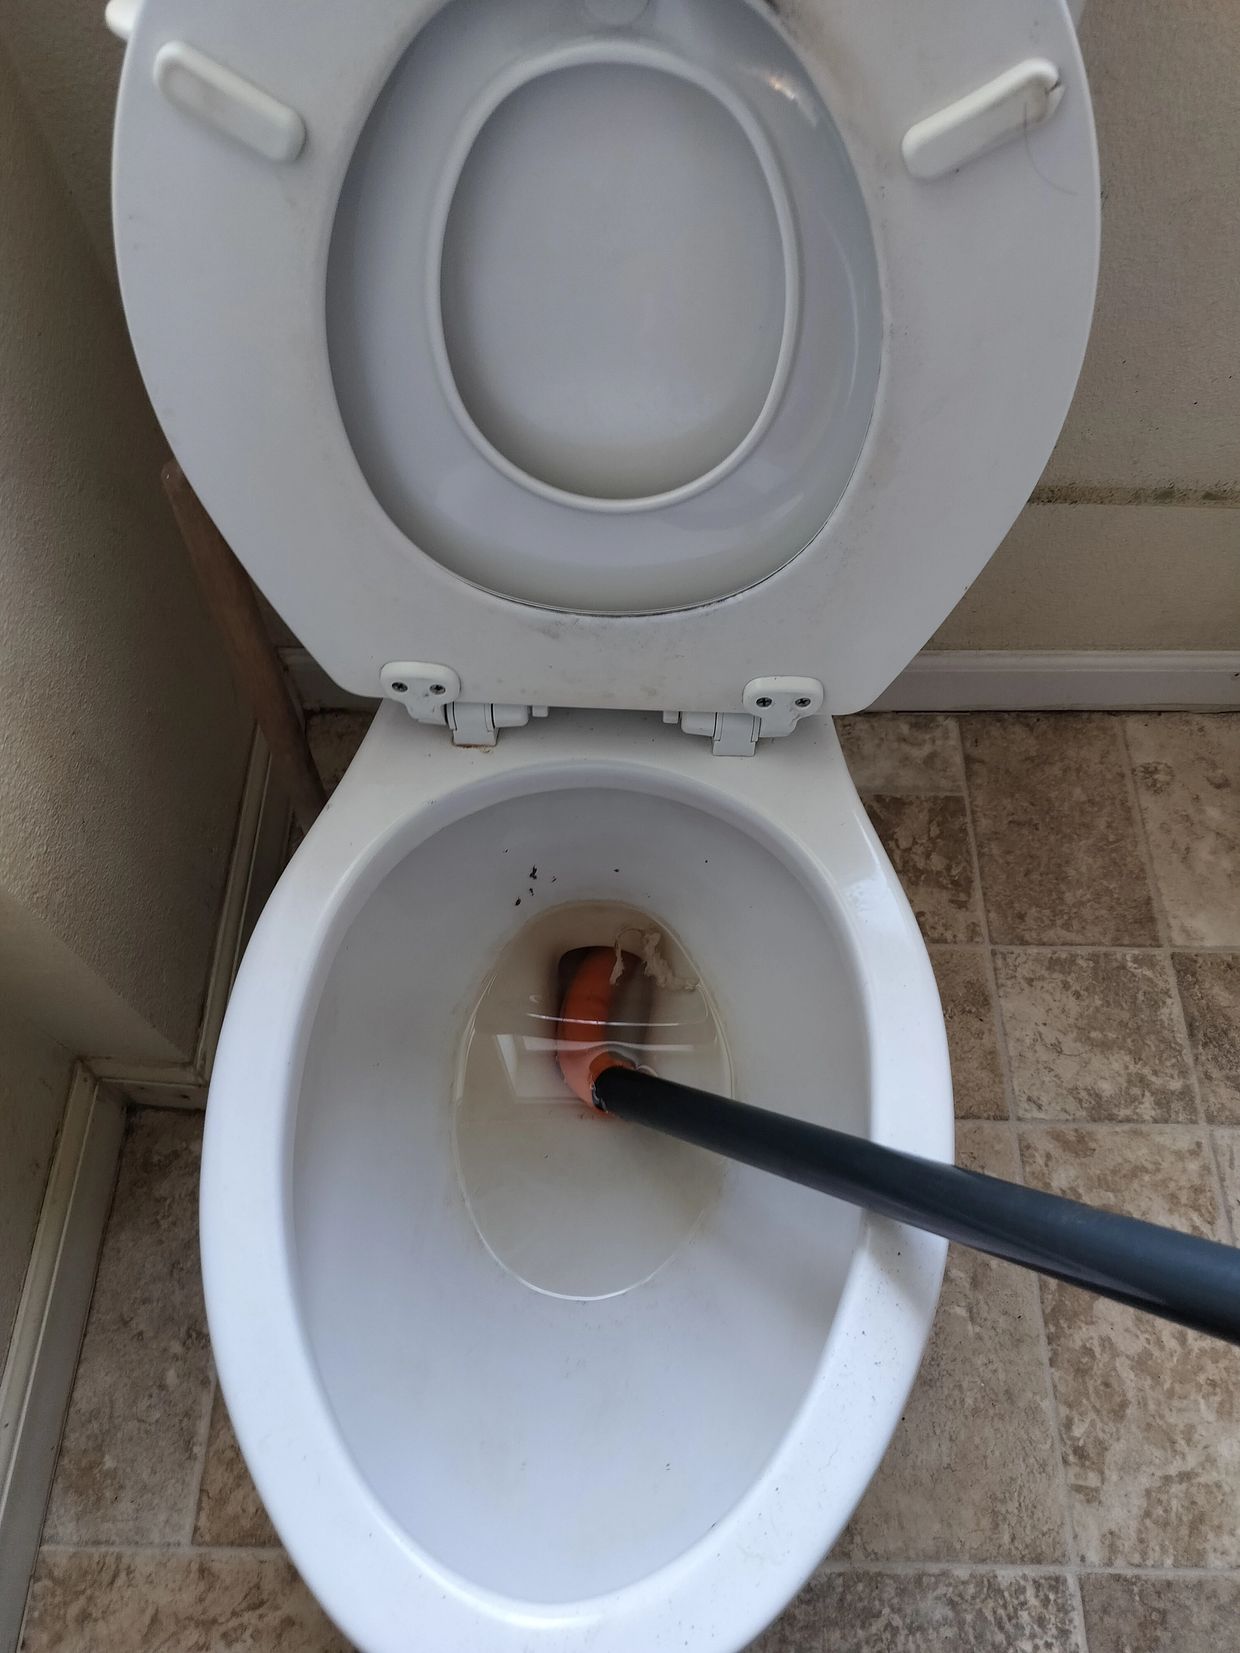 Toilet Auger being used to unclog toilet in Corvallis Oregon 